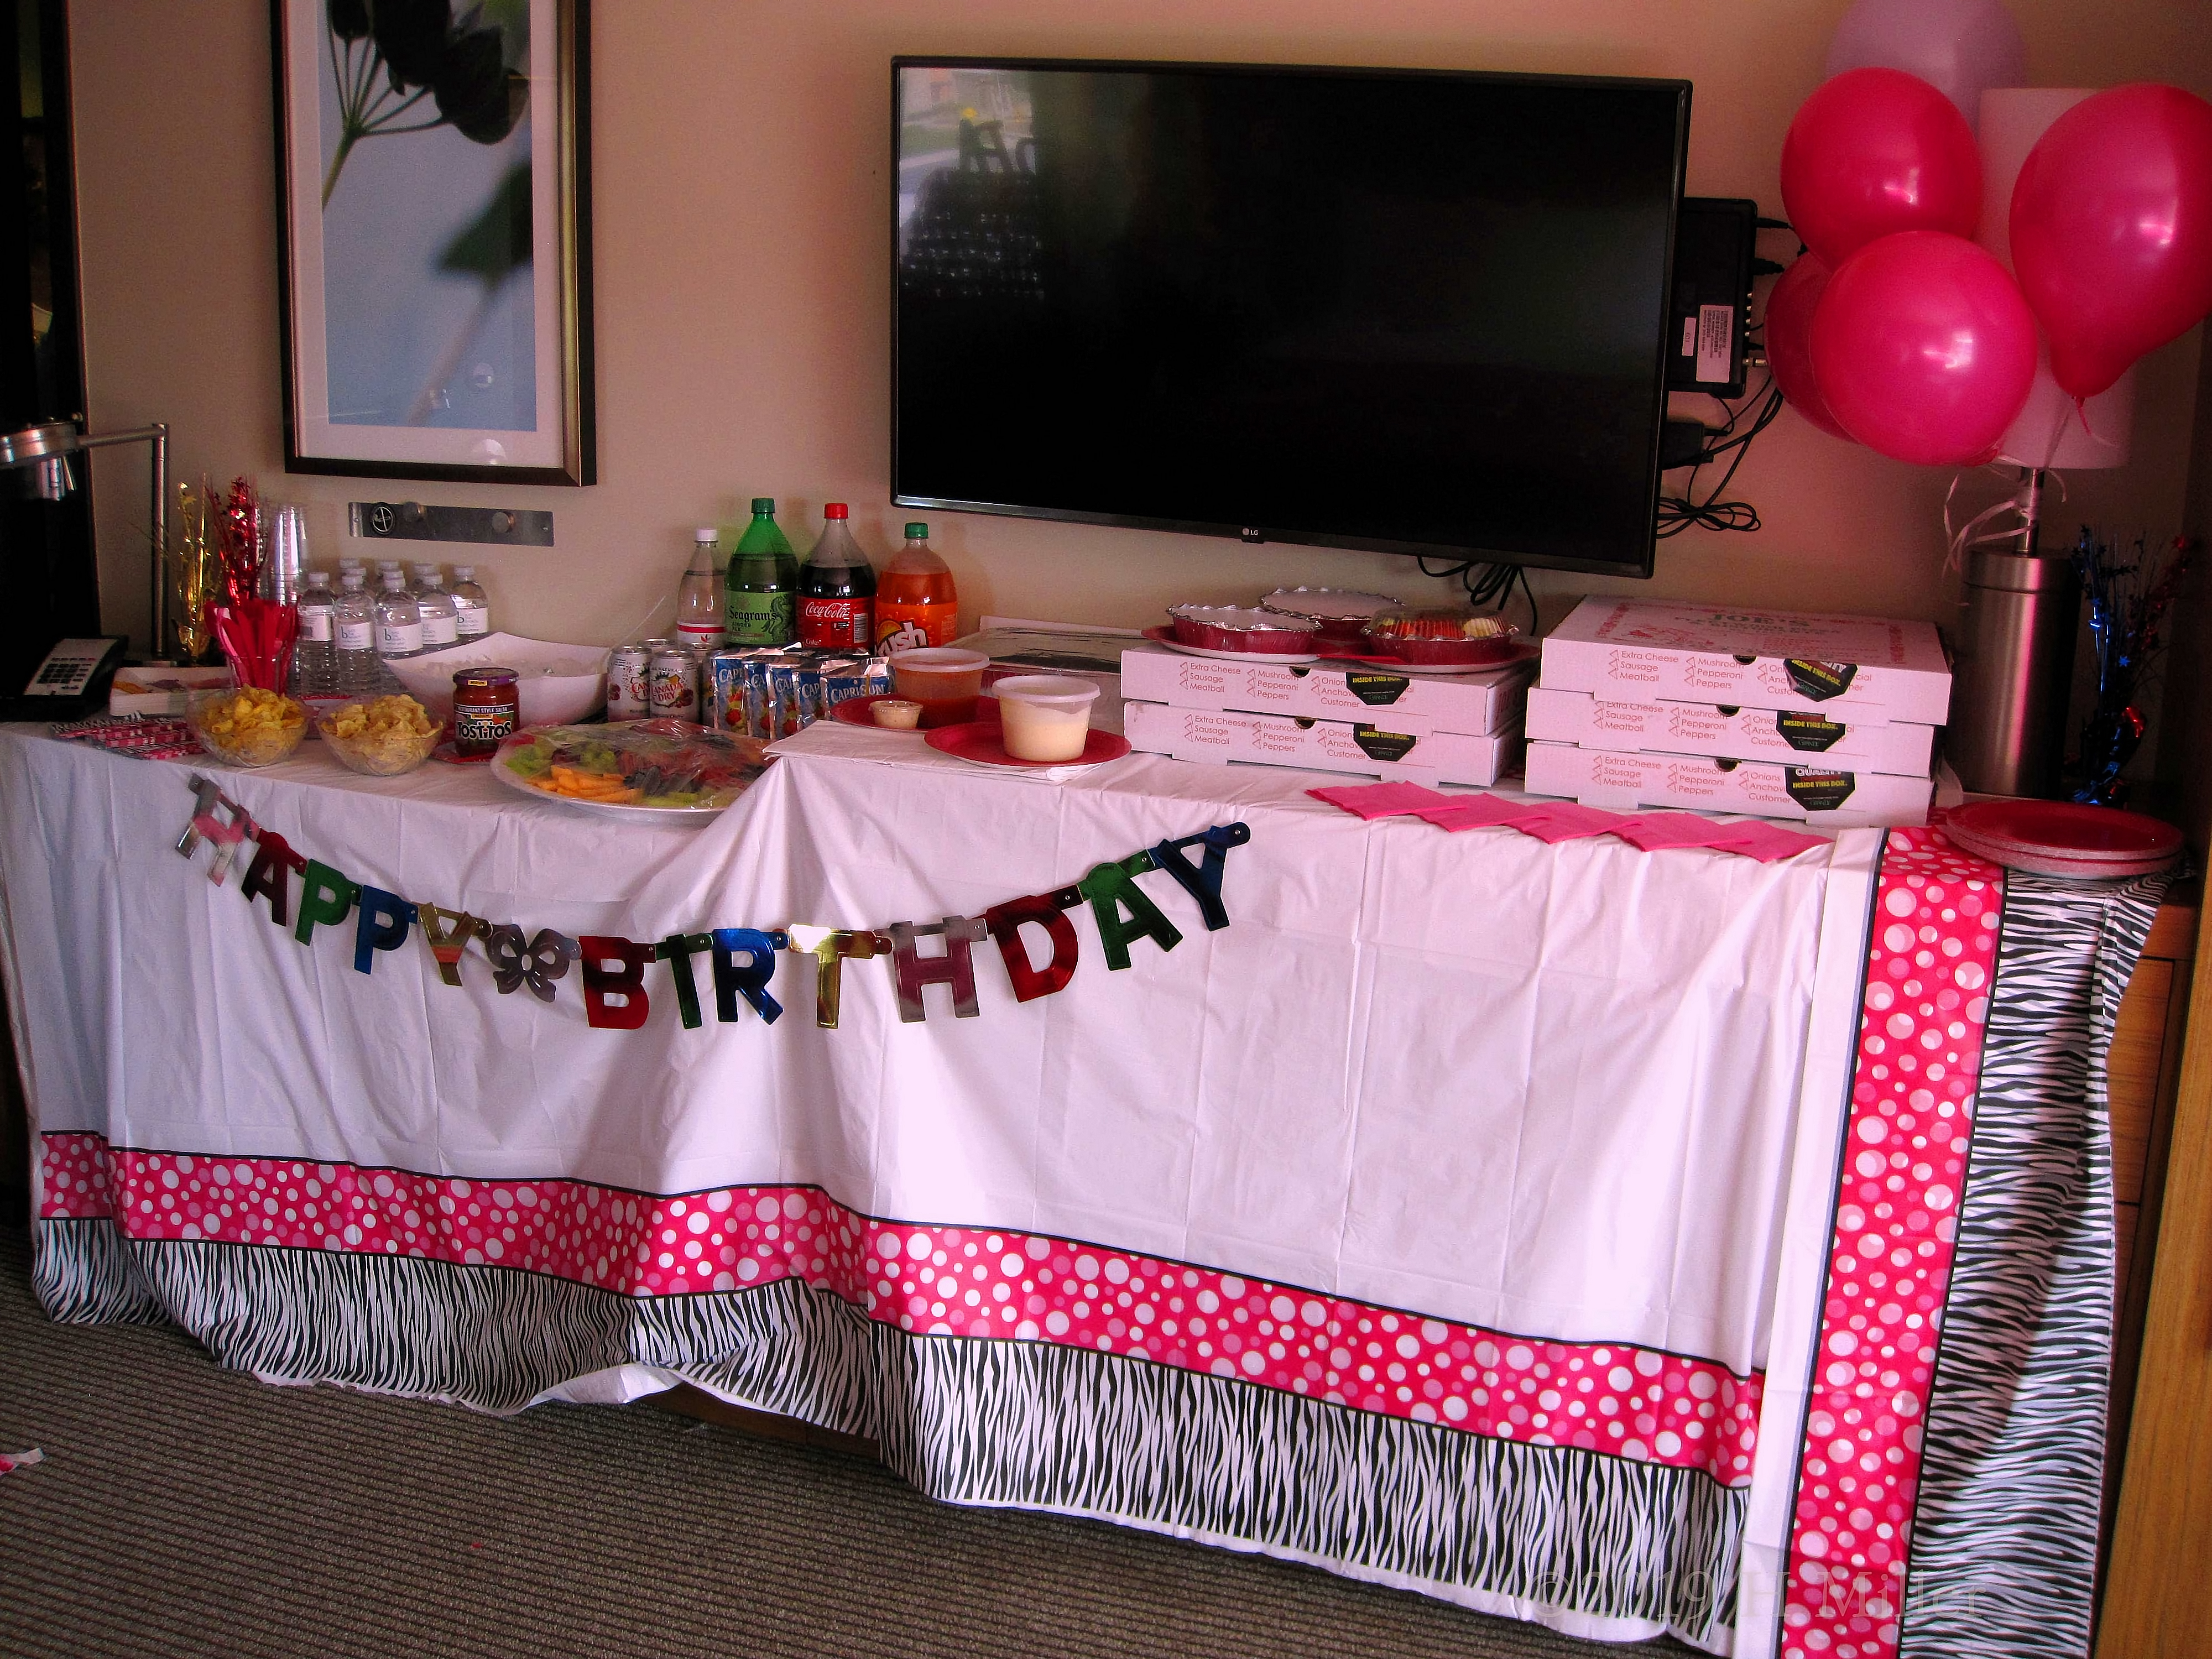 Spa Birthday Party For Girls For Nicole And Michelle At Home In New Jersey 